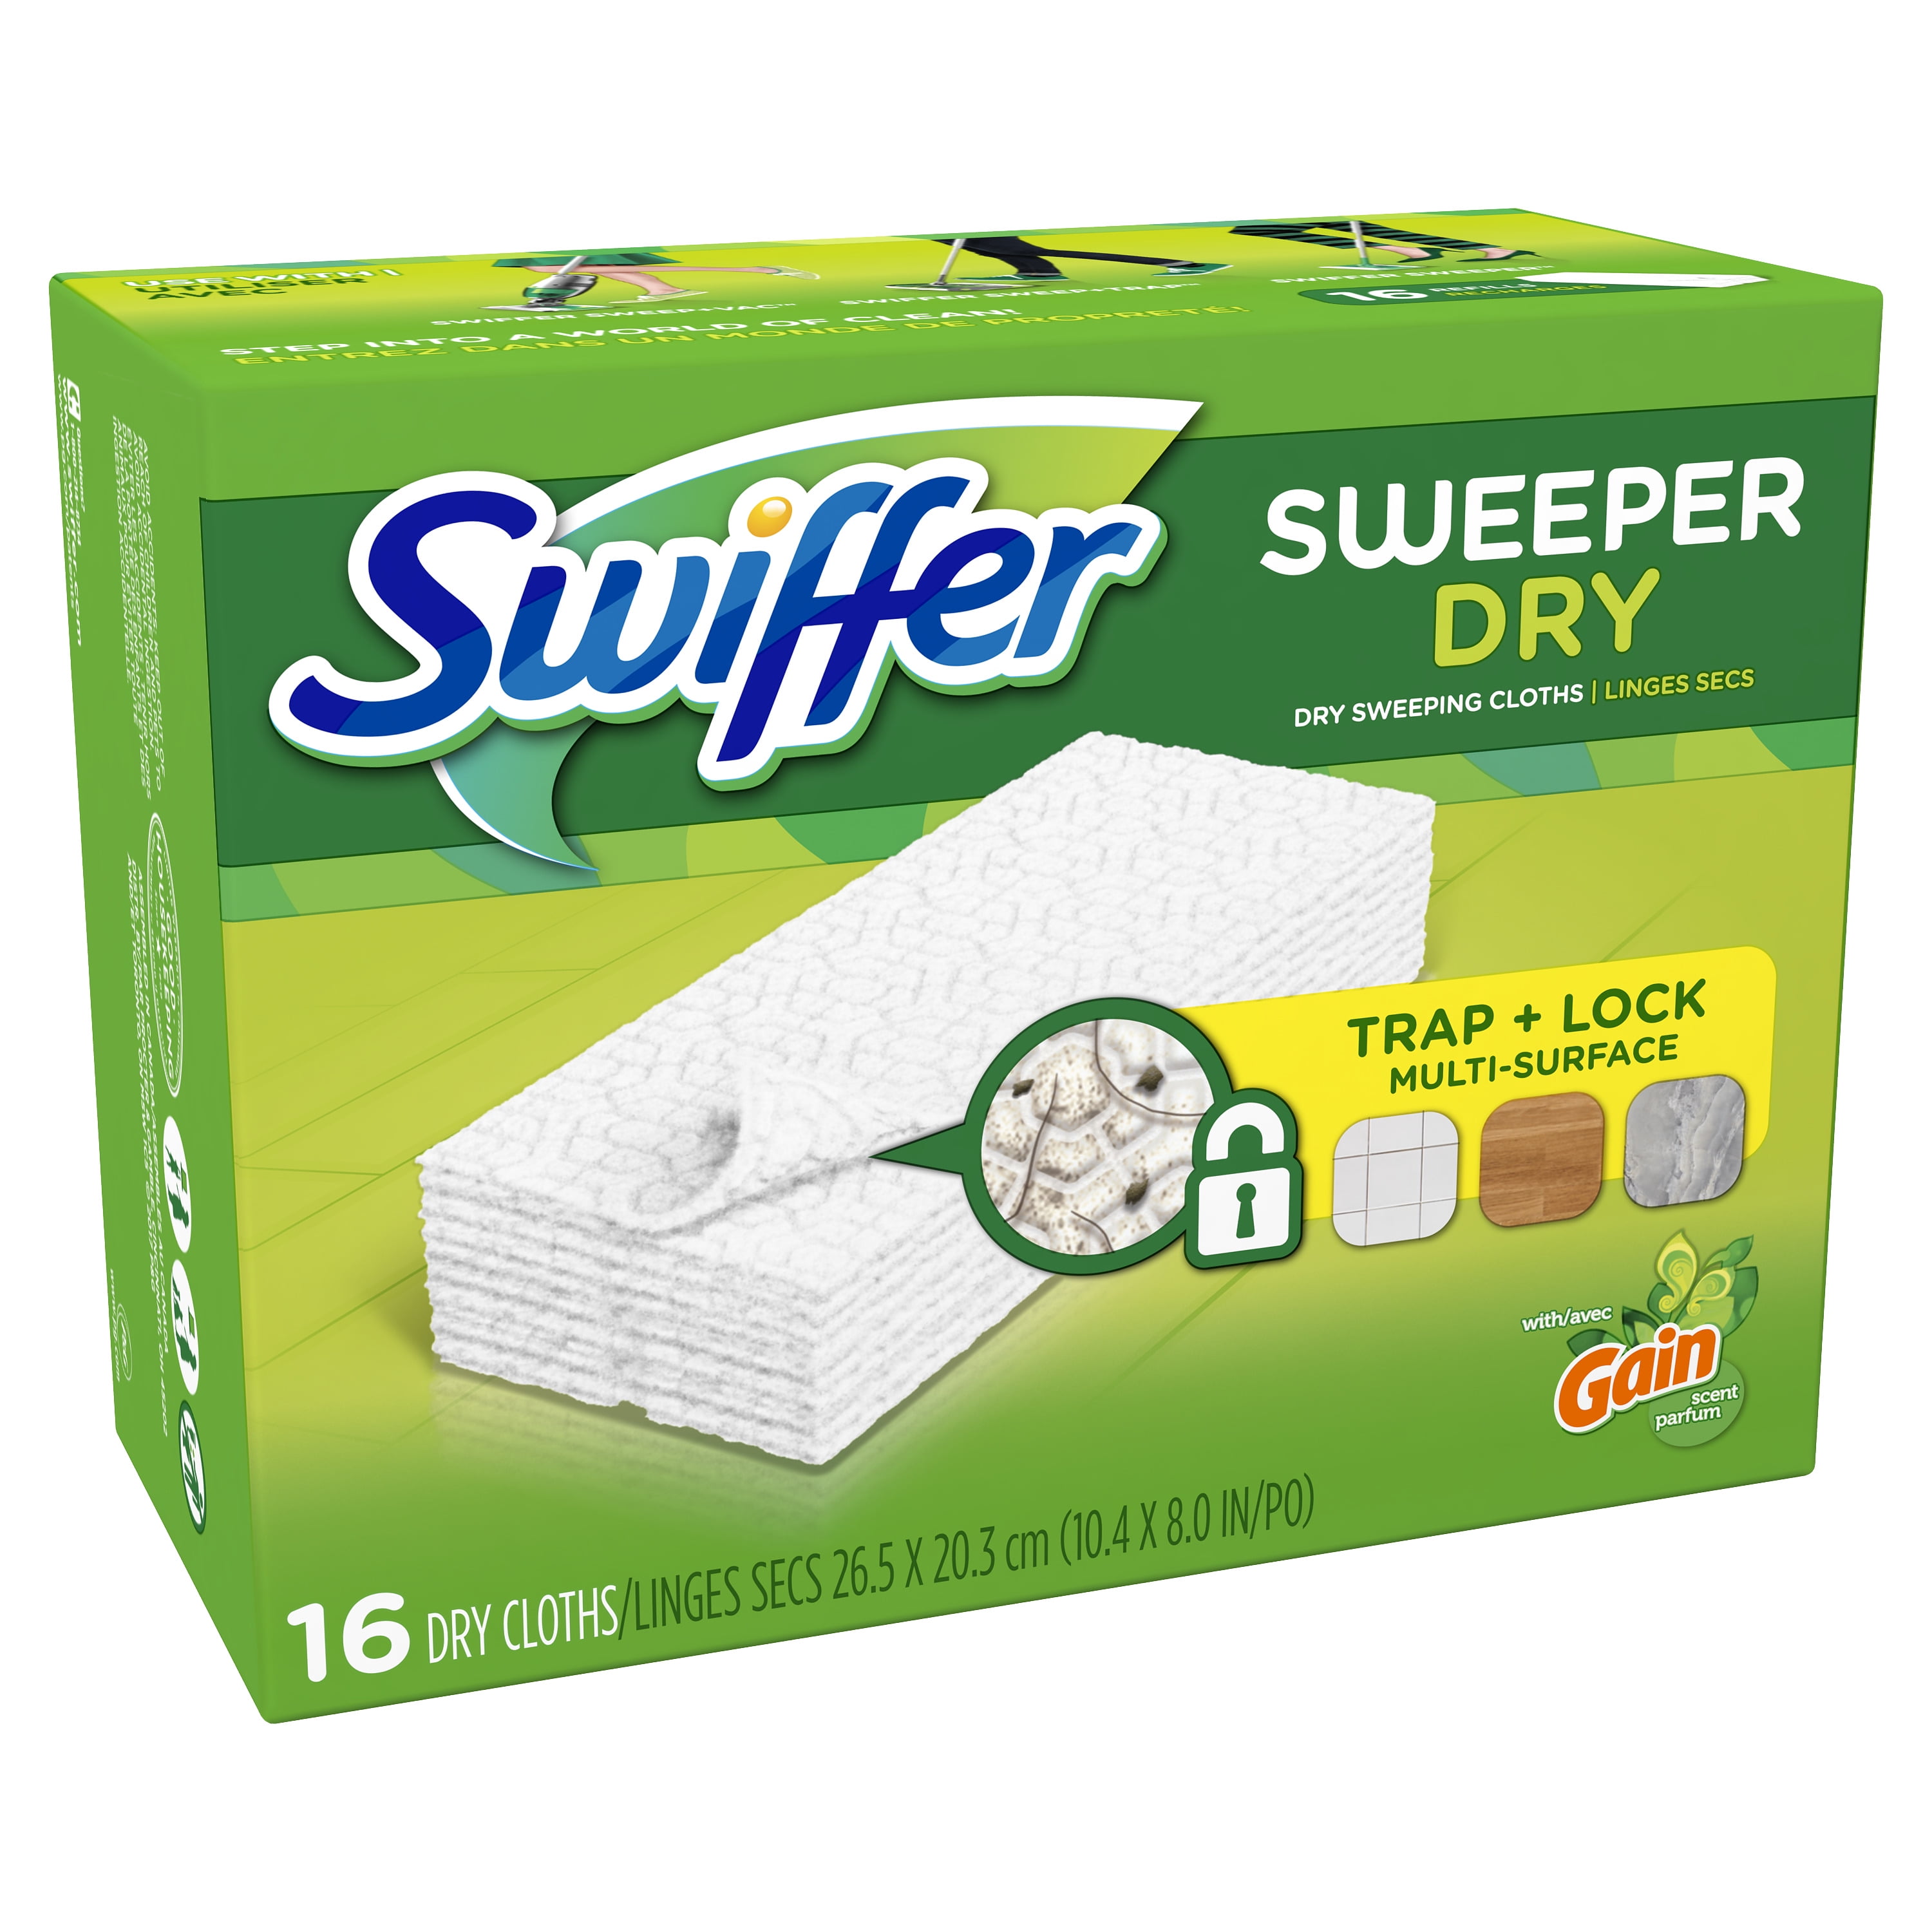 Swiffer Sweeper Dry Sweeping Pad Multi Surface Refills for Dusters Floor  Mop, Gain Scent, 16 count 